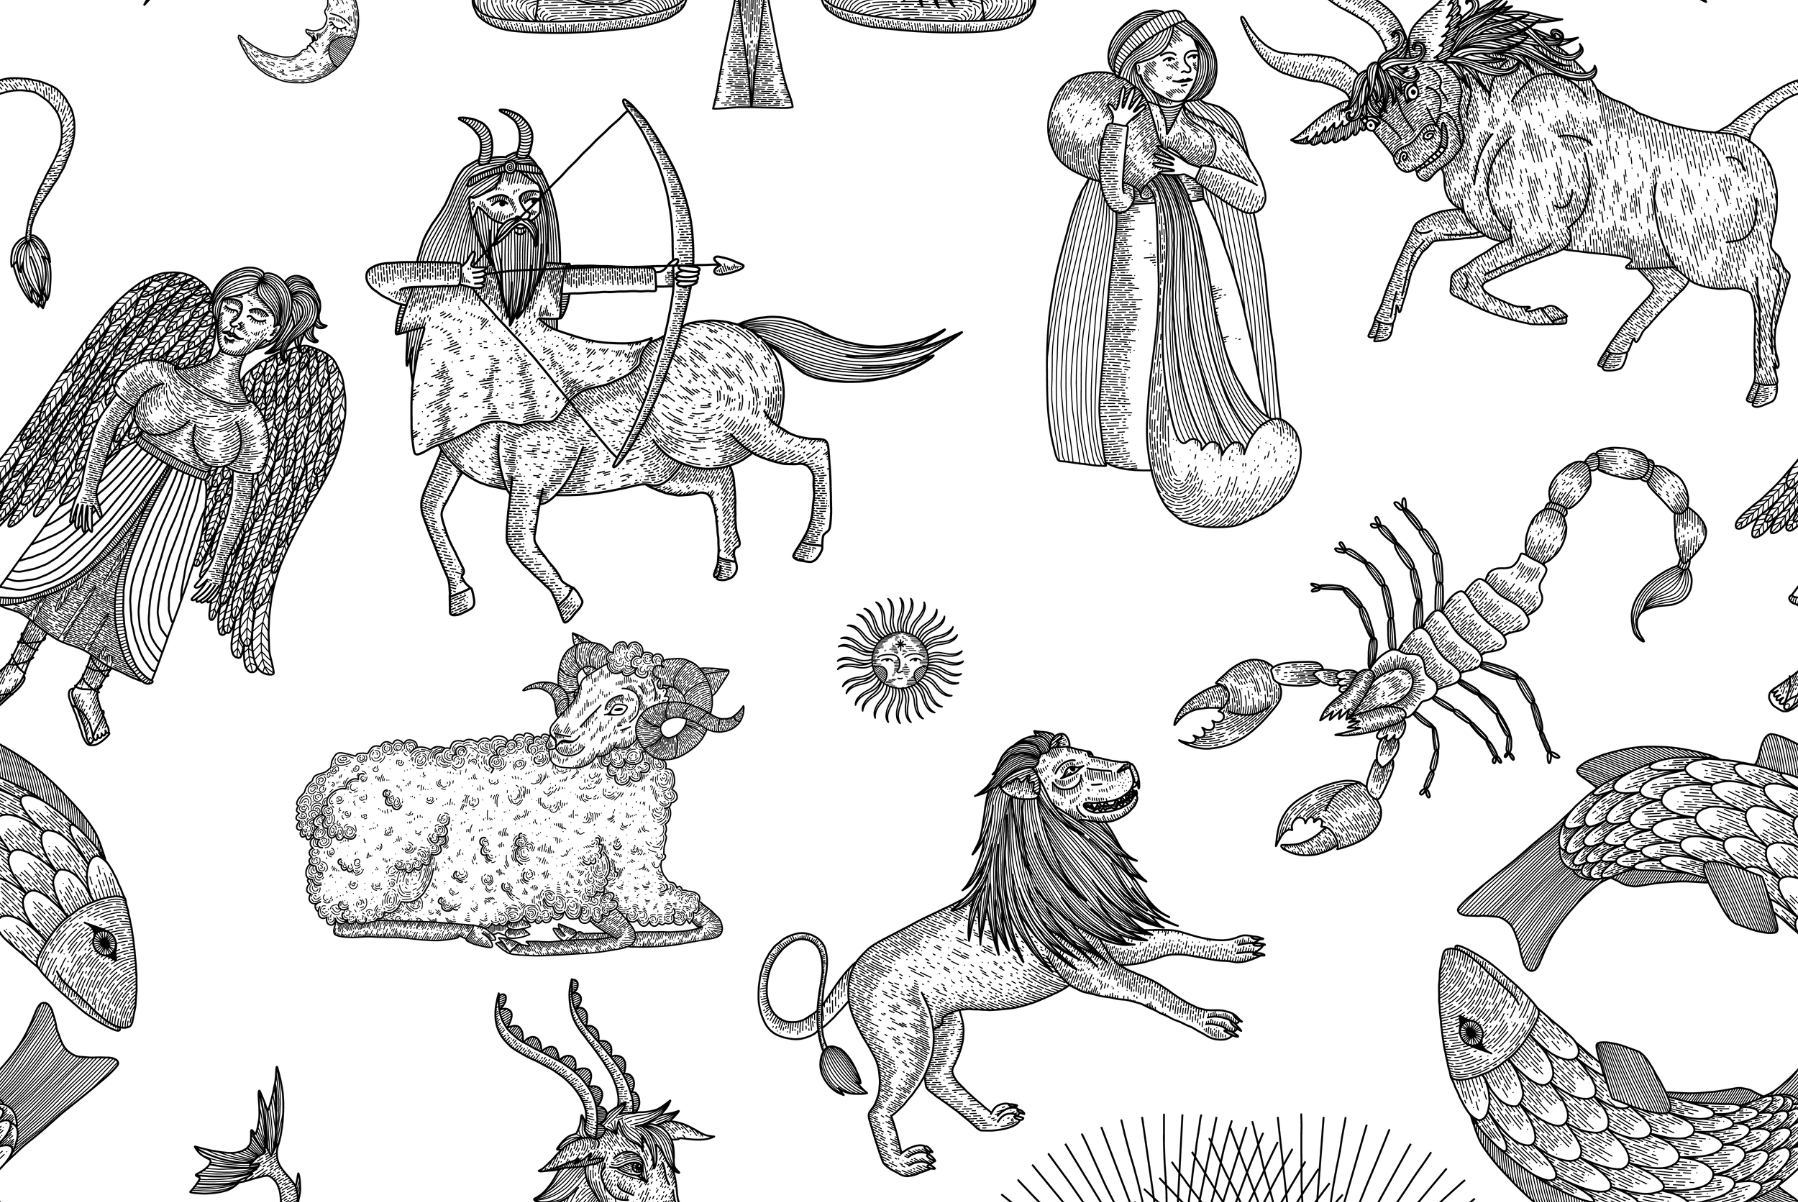 Astrology Explained: The Zodiac Signs